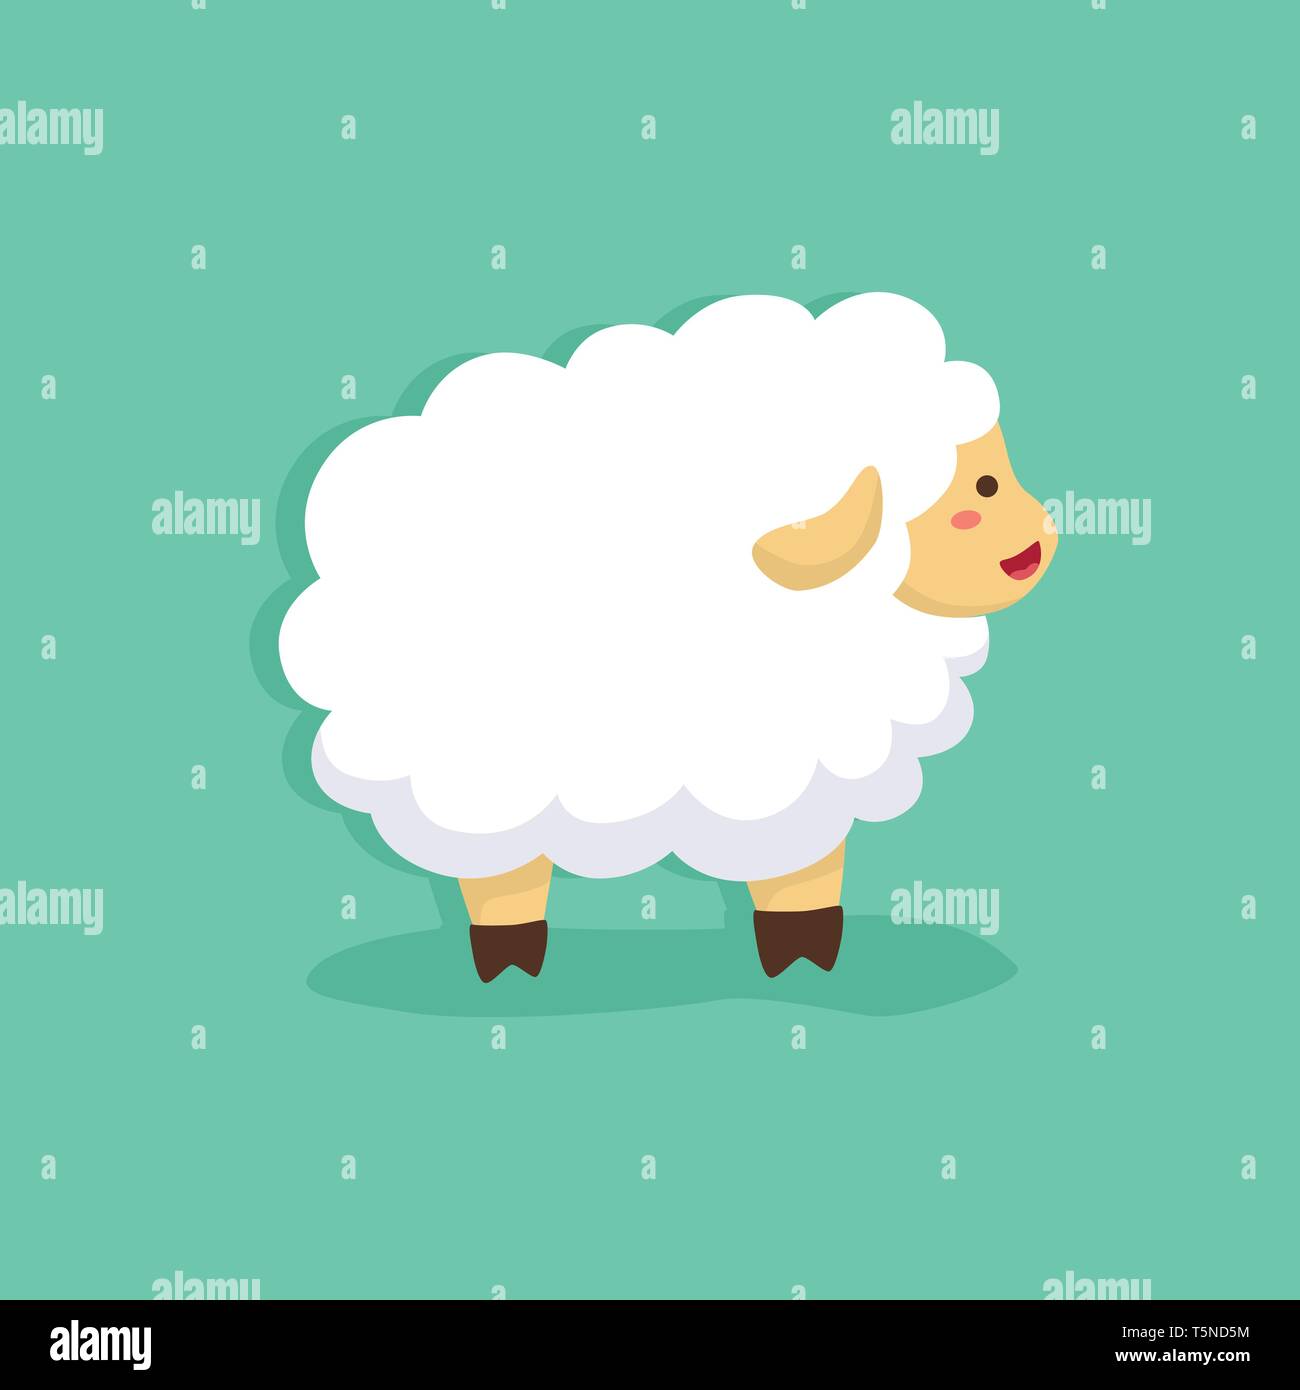 cute sheep facing side on tosca green background vector illustration Stock Vector